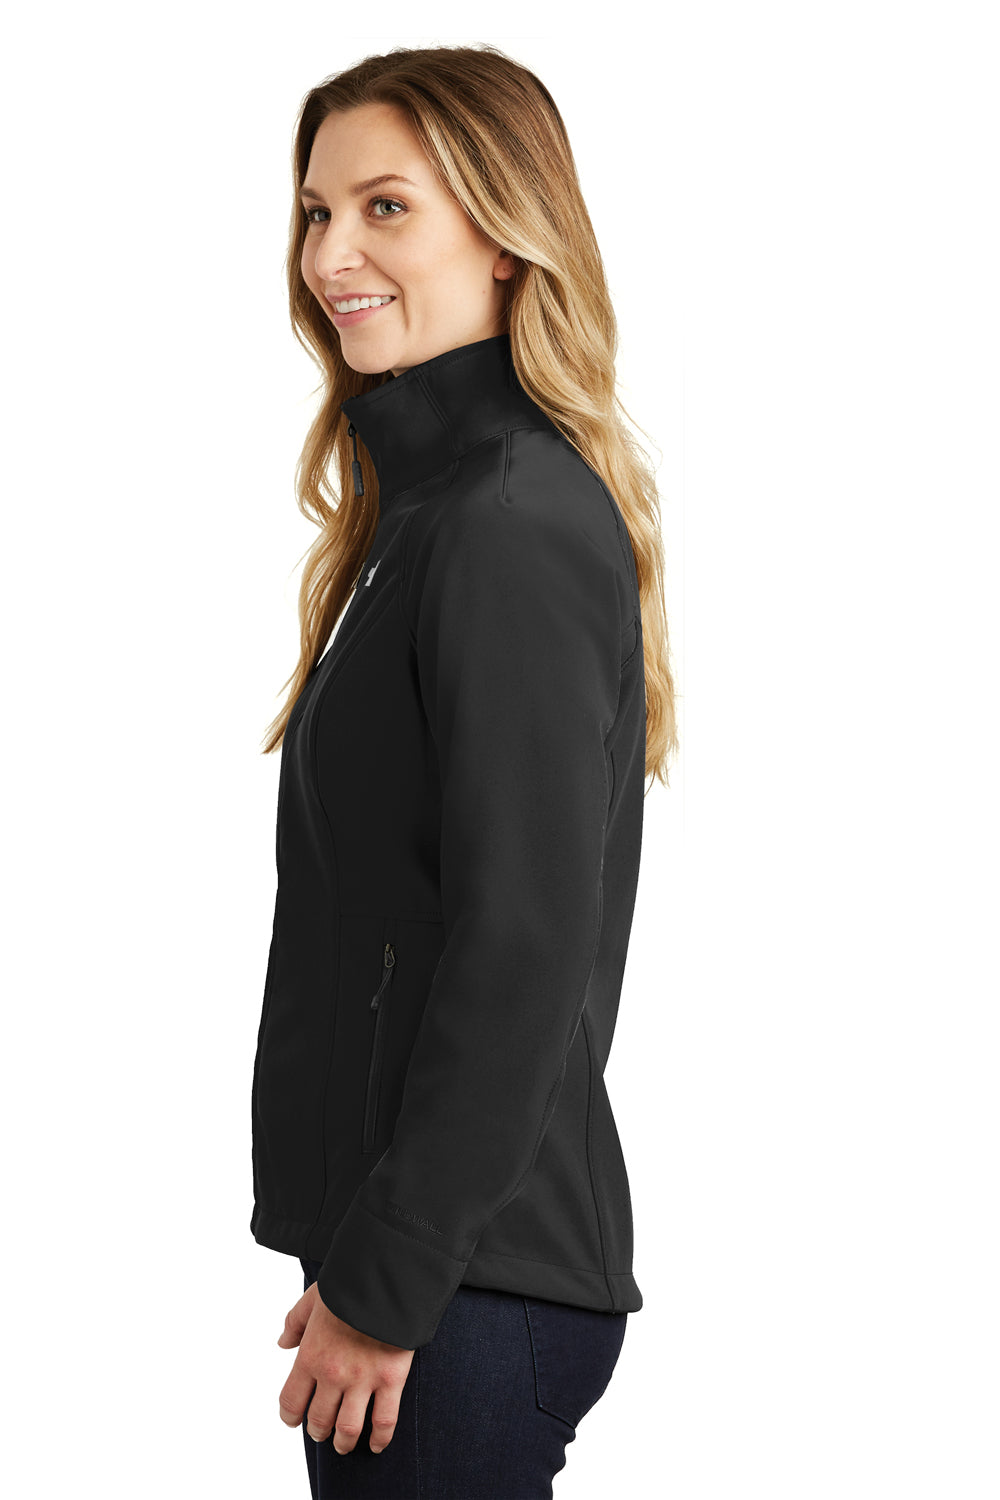 The North Face NF0A3LGU Womens Apex Barrier Wind & Resistant Full Zip Jacket Black Side